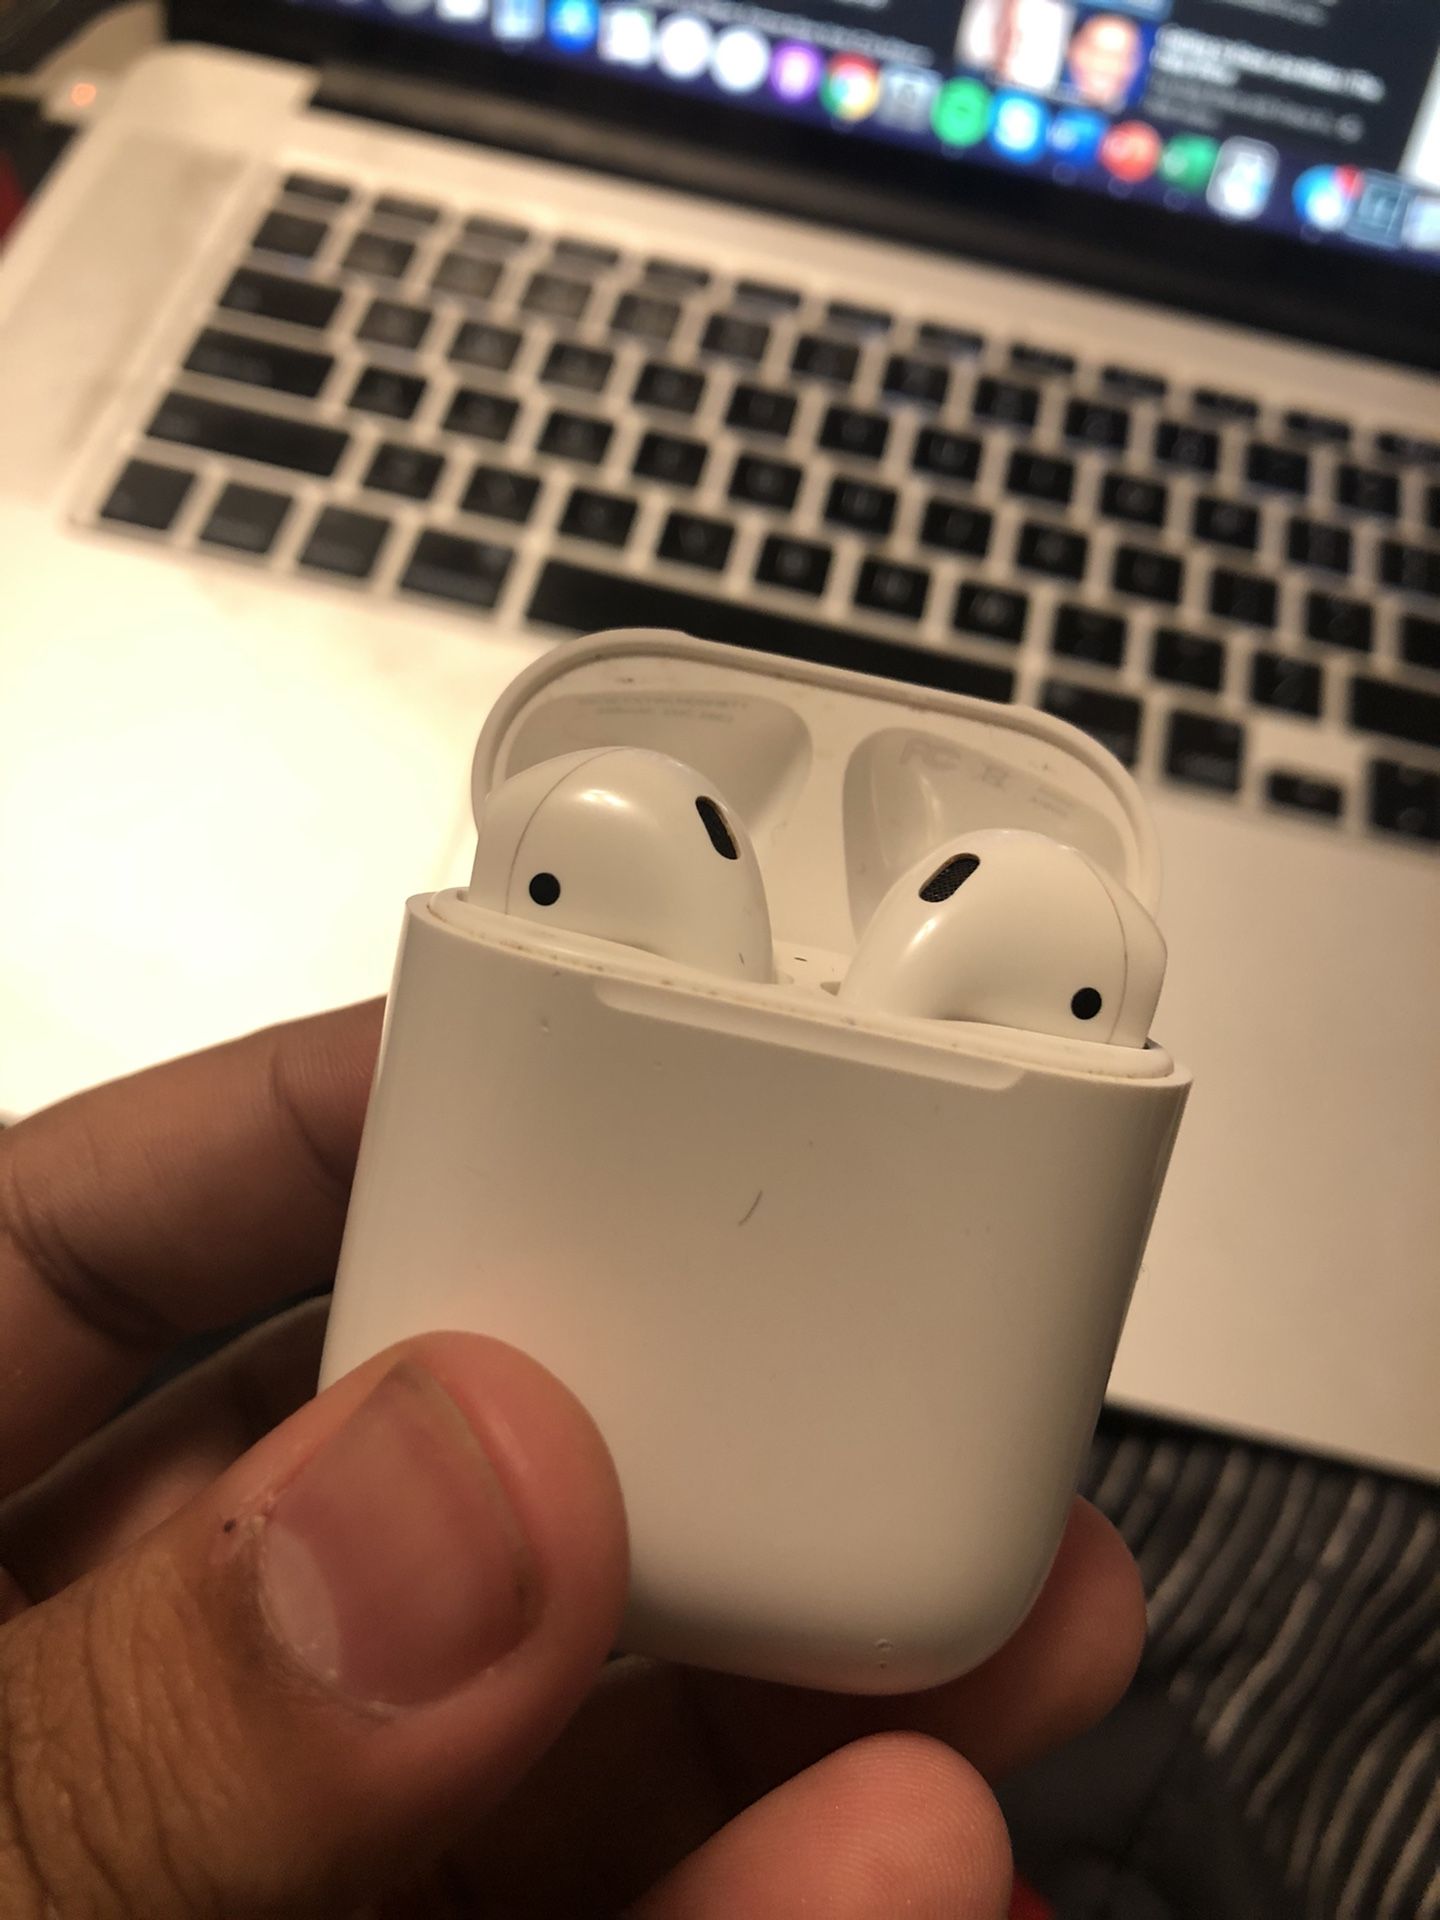 AIRPODS LIKE NEW CONDITION